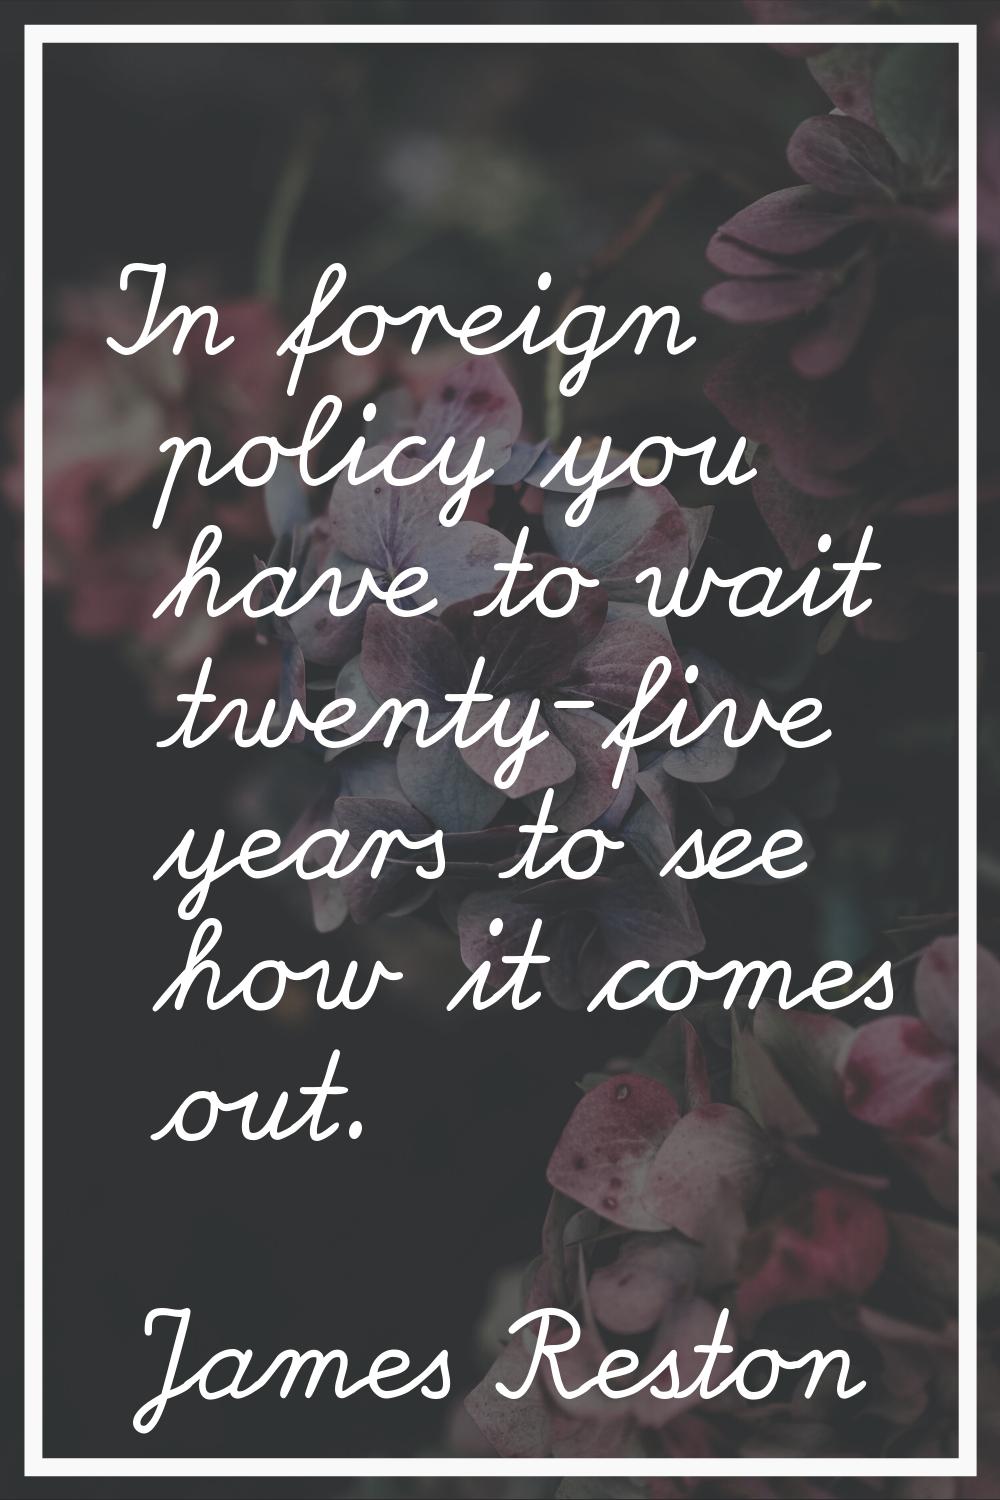 In foreign policy you have to wait twenty-five years to see how it comes out.